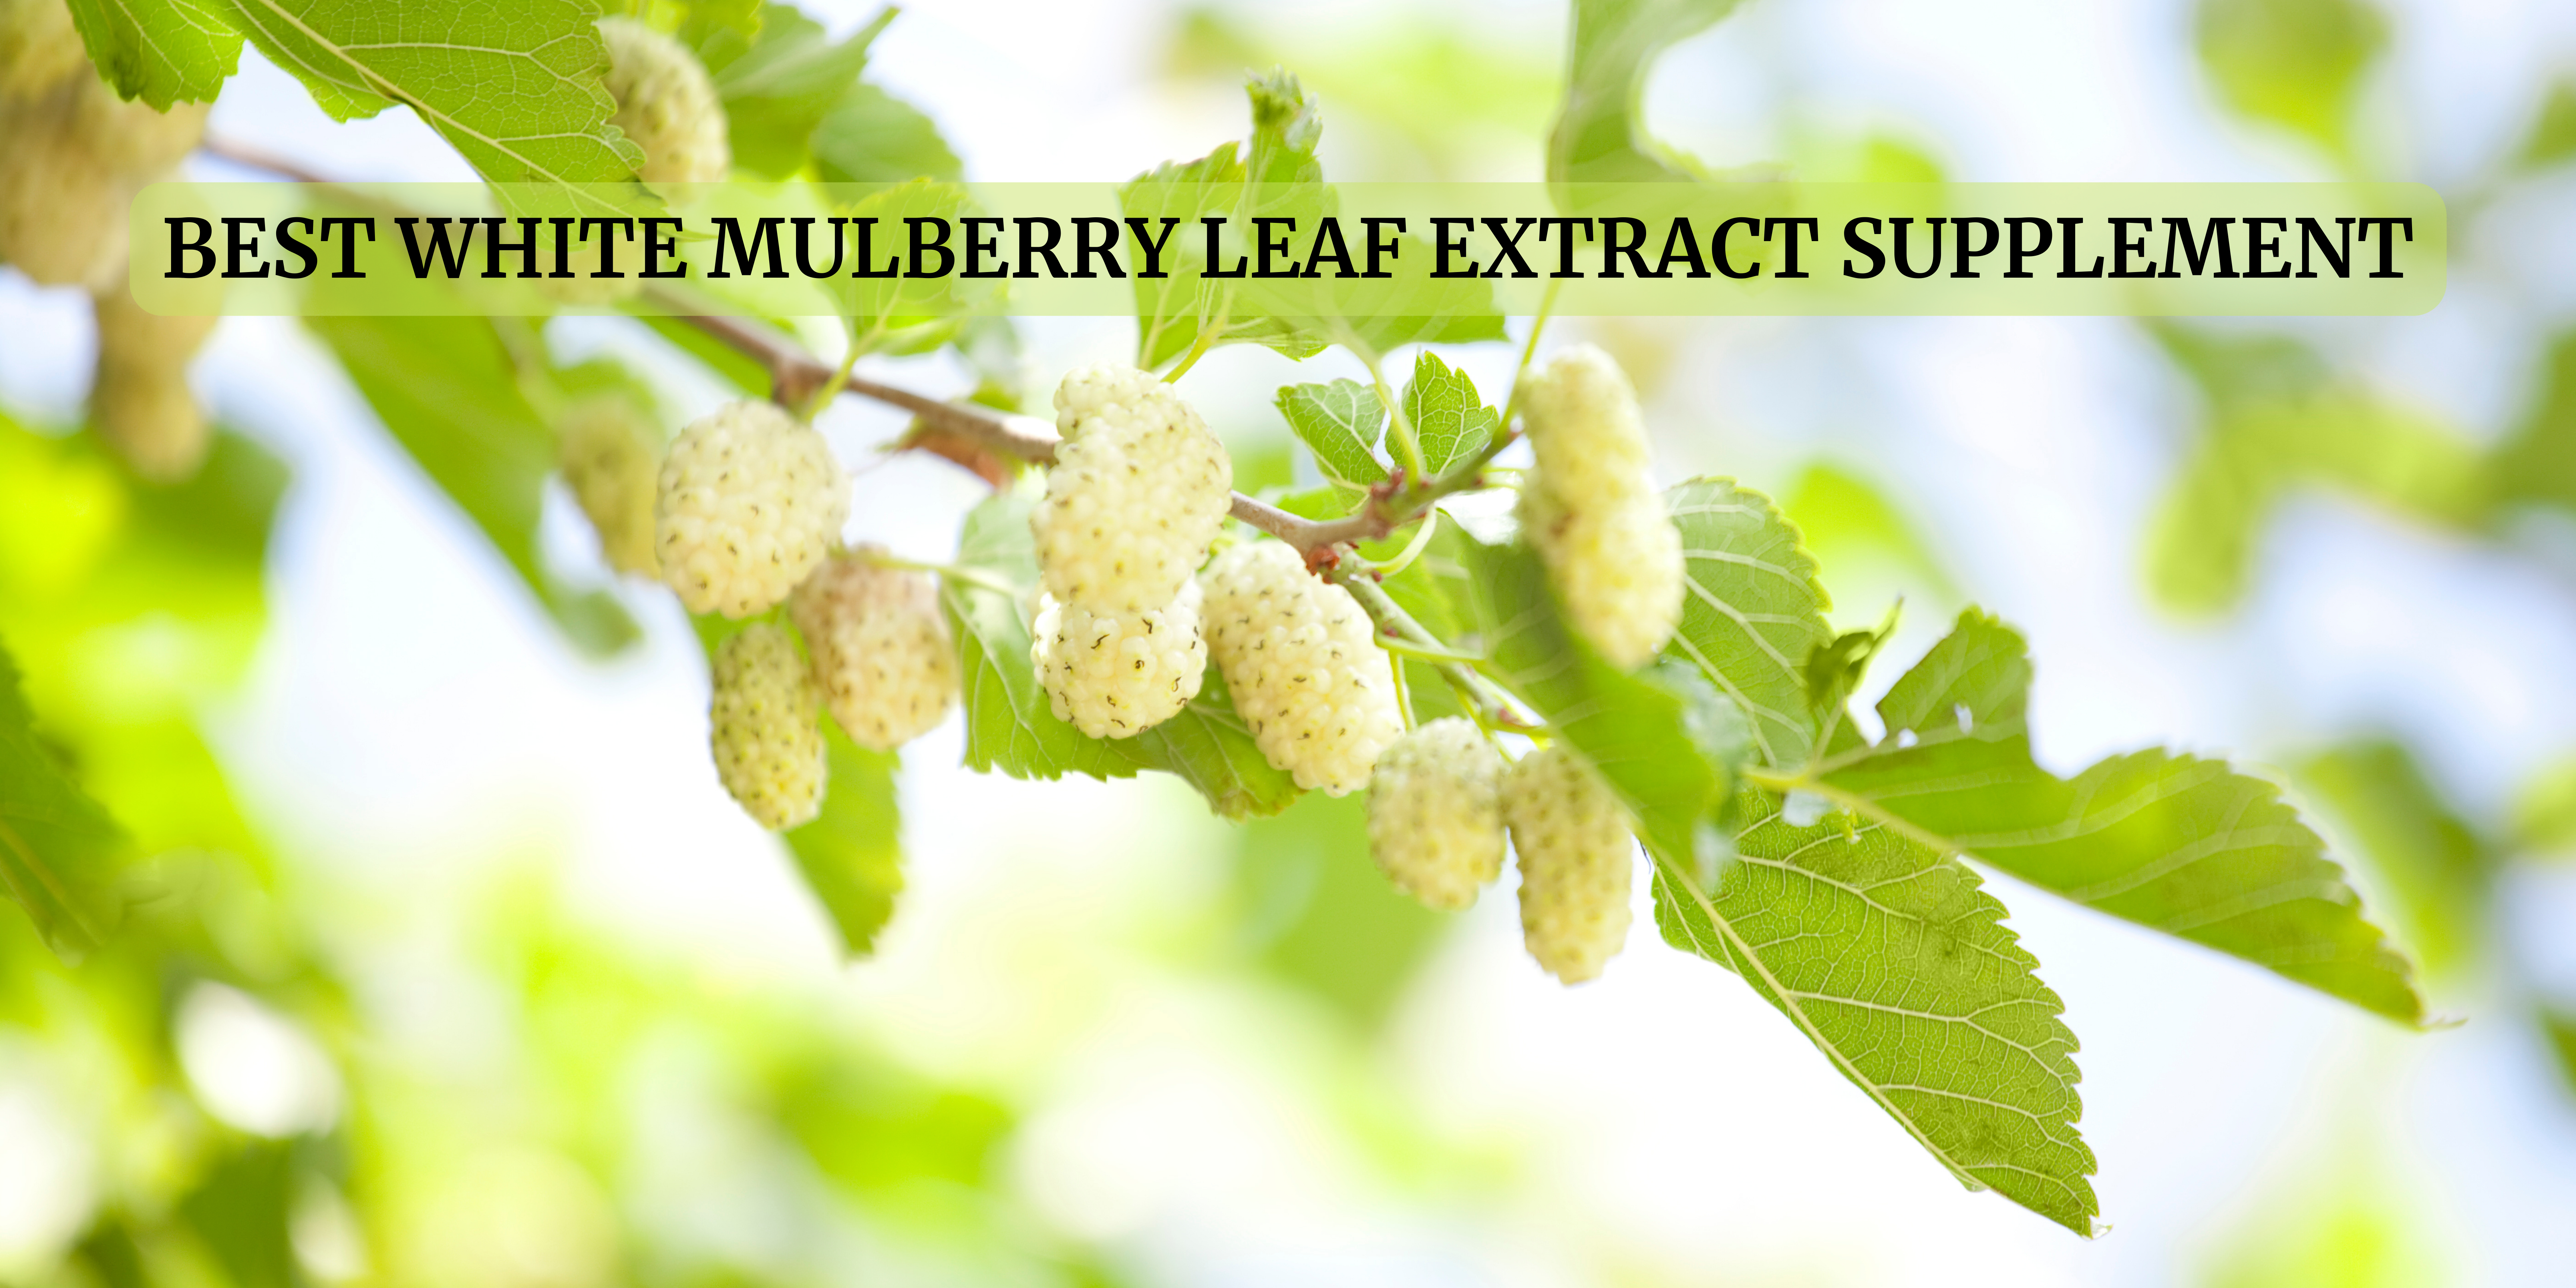 white mulberry leaf extract supplement in Germany